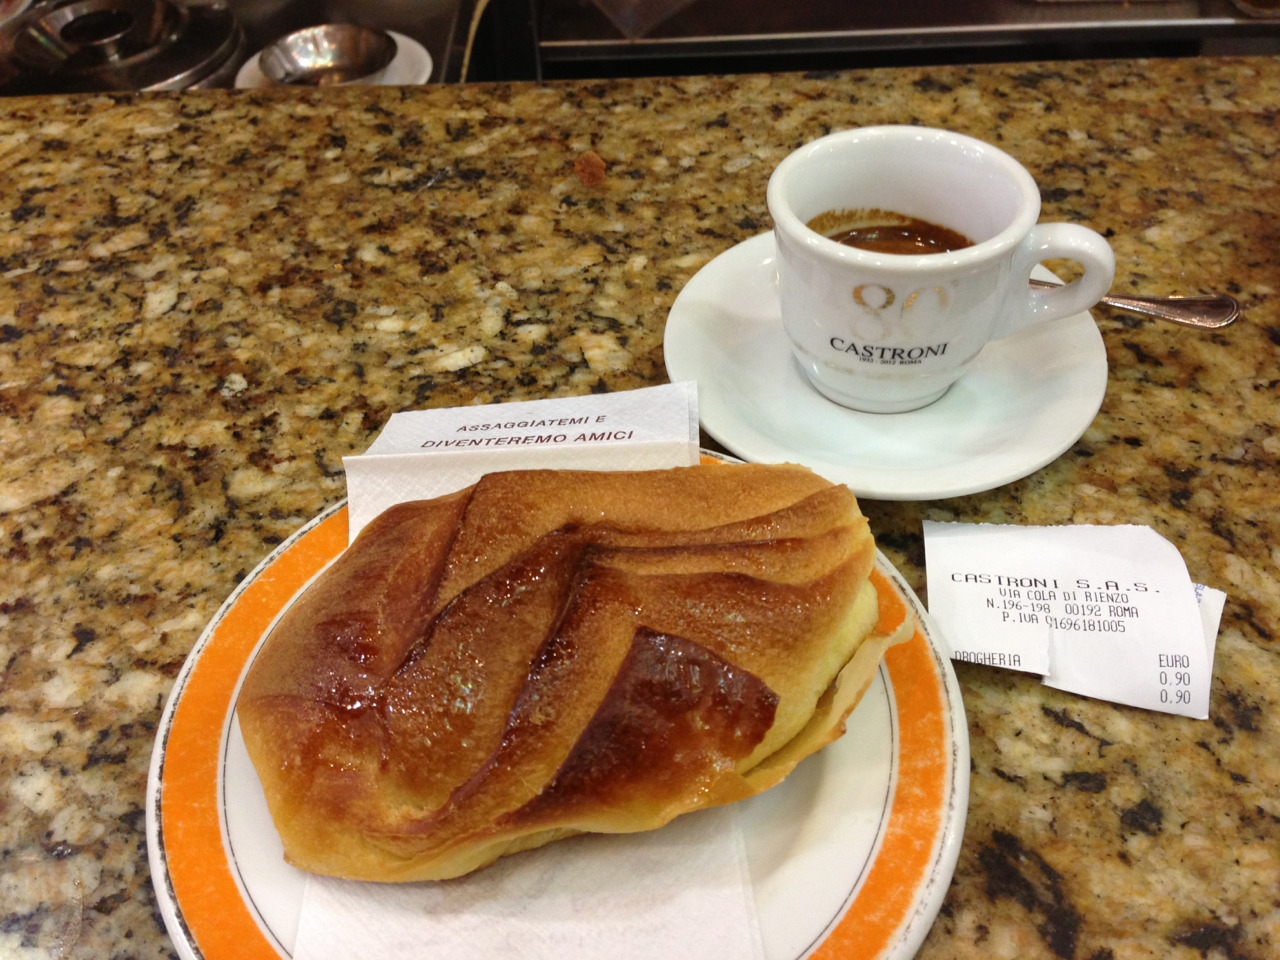 I love that Rome has great espresso *everywhere*. This was at Castroni.